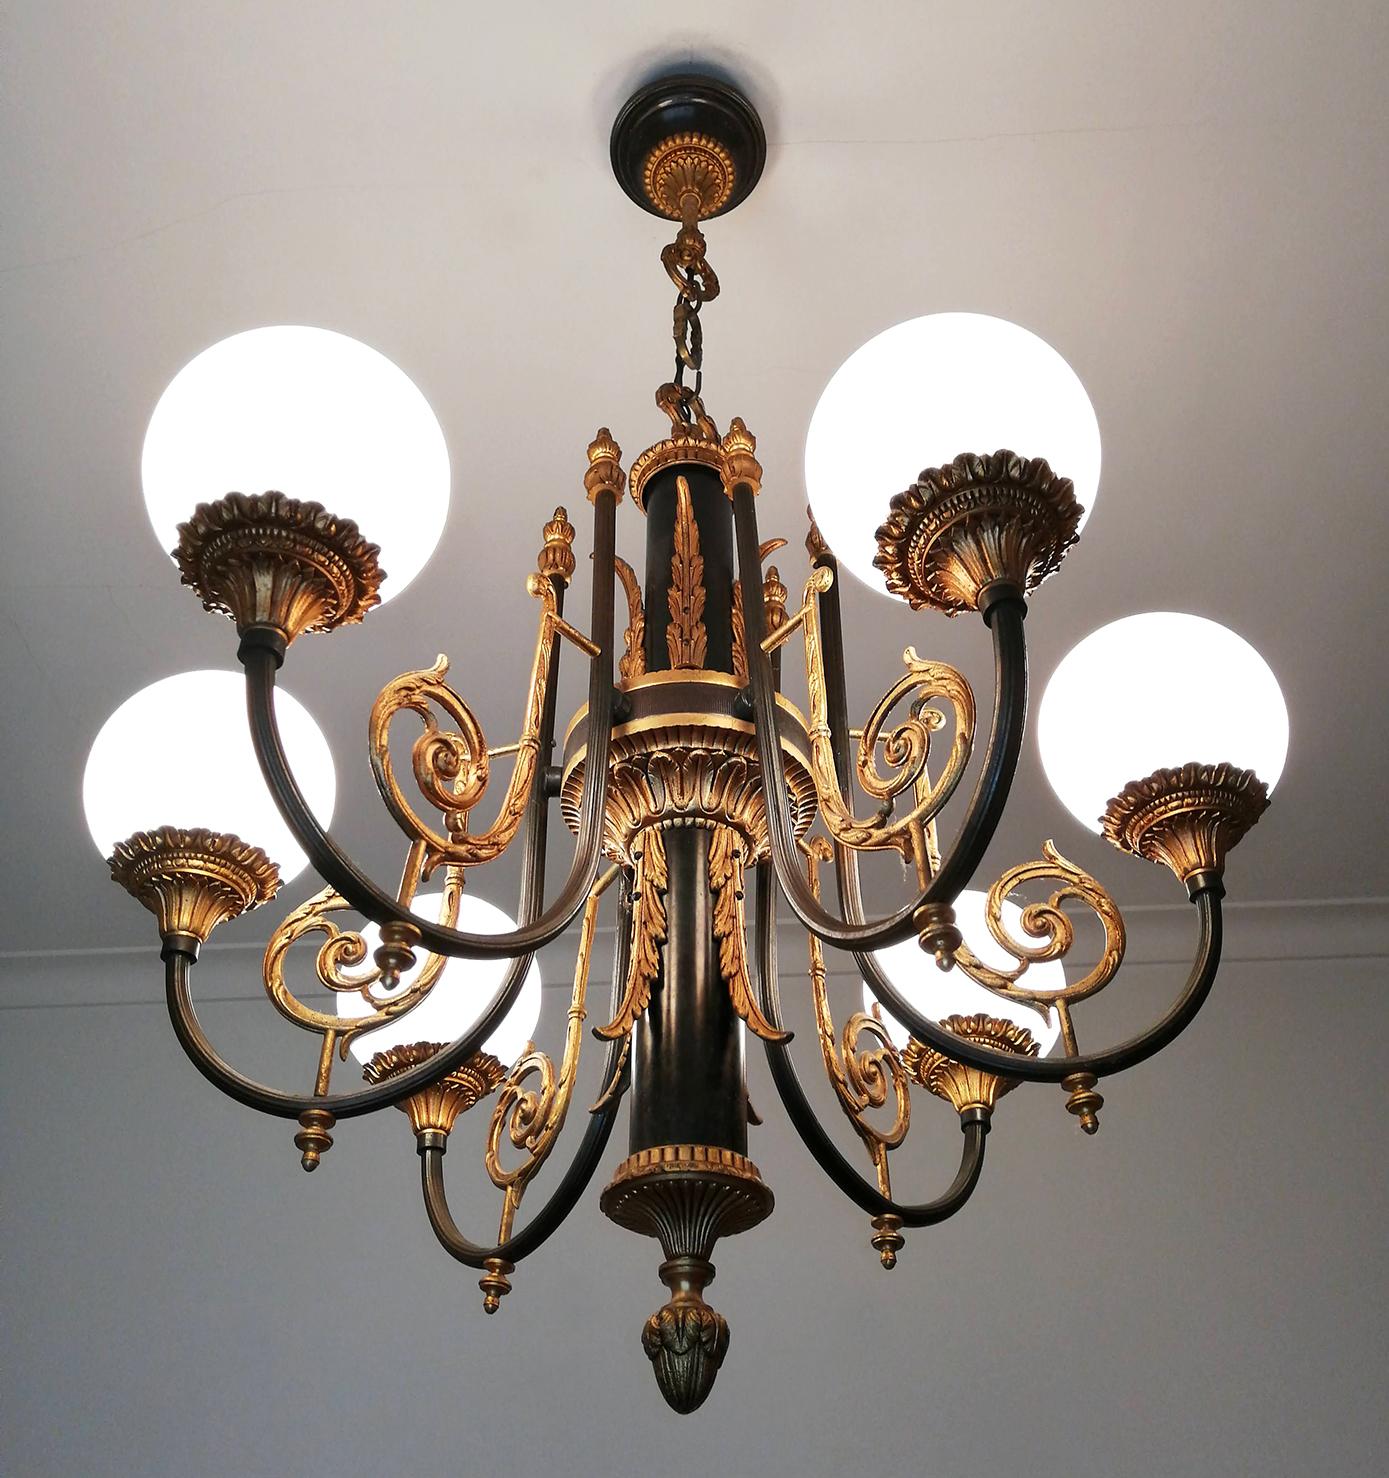 Antique French Empire Neoclassical Gilt & Patina Bronze Opaline Globe Chandelier For Sale 7